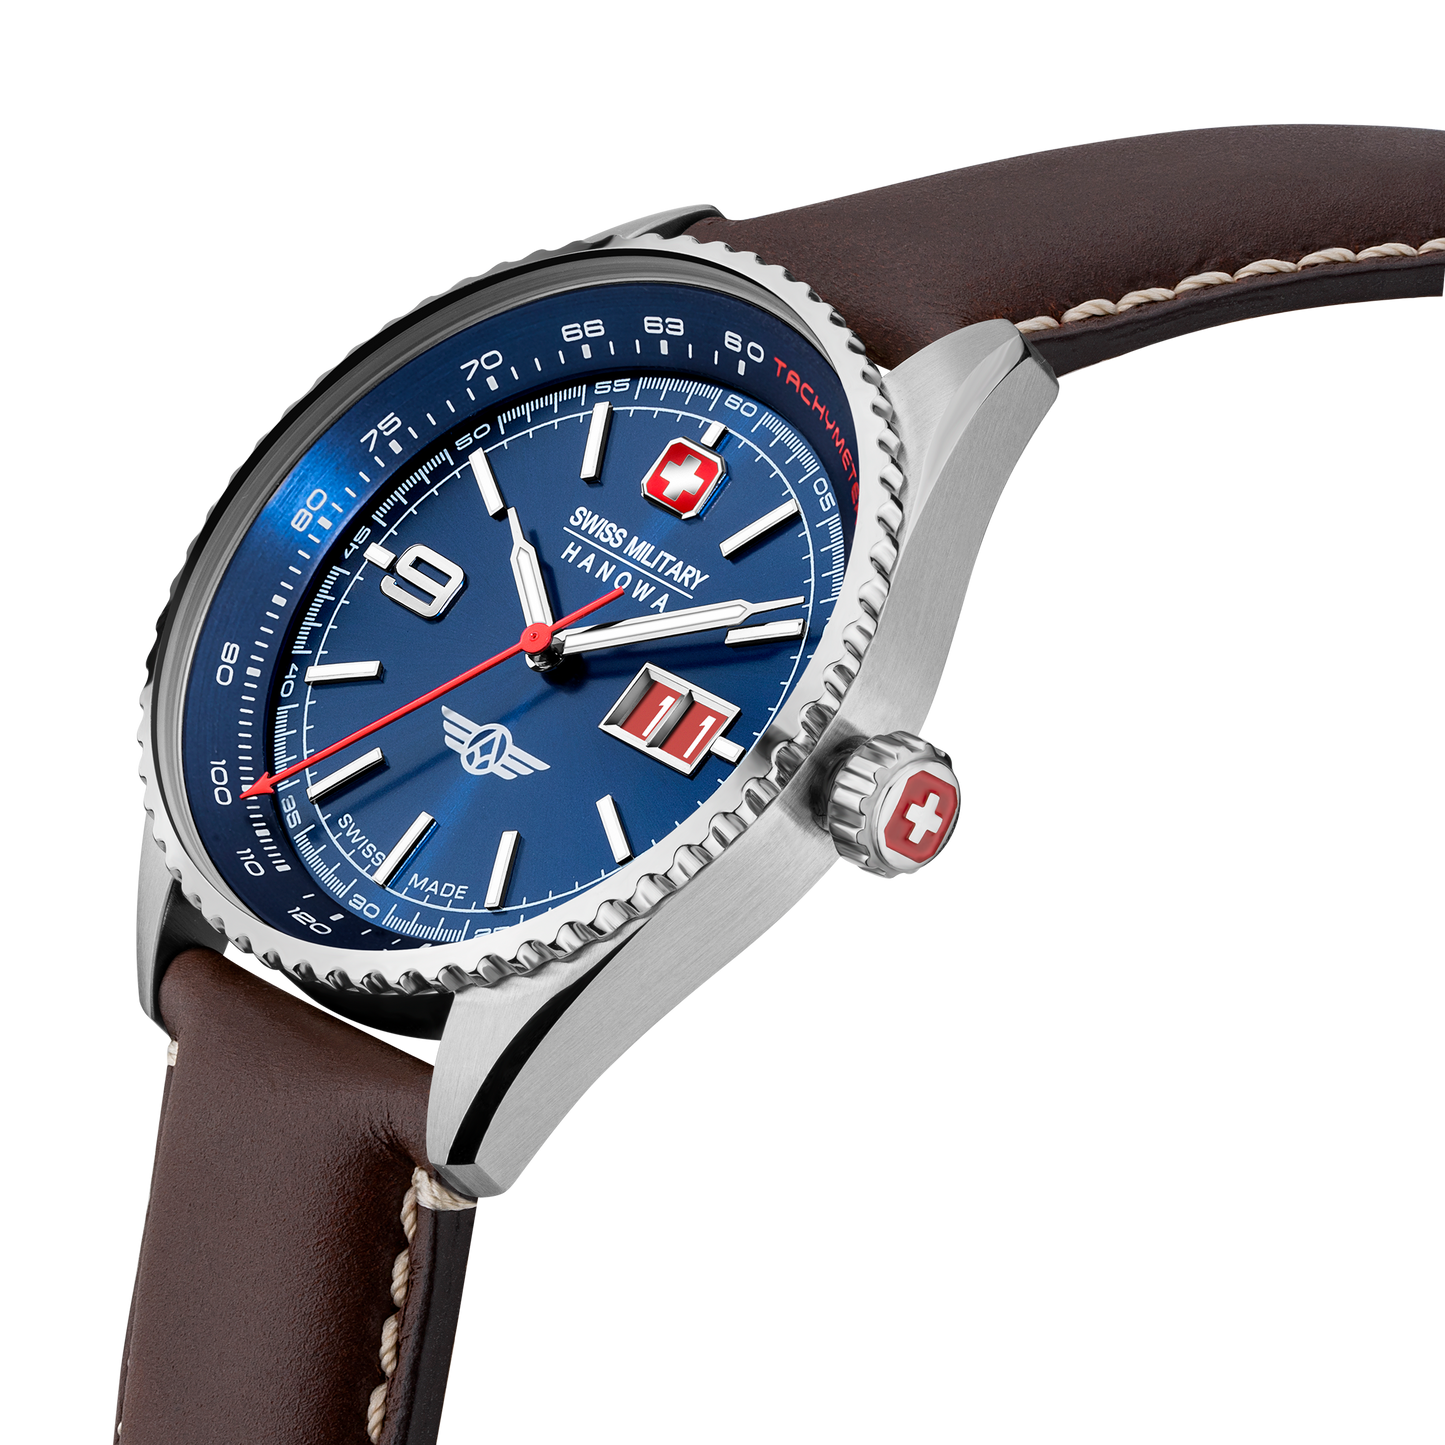 Swiss Military Hanowa Afterburn. Stainless steel case, blue dial, big date with red date disk, genuine italian leather in brown. Side image.